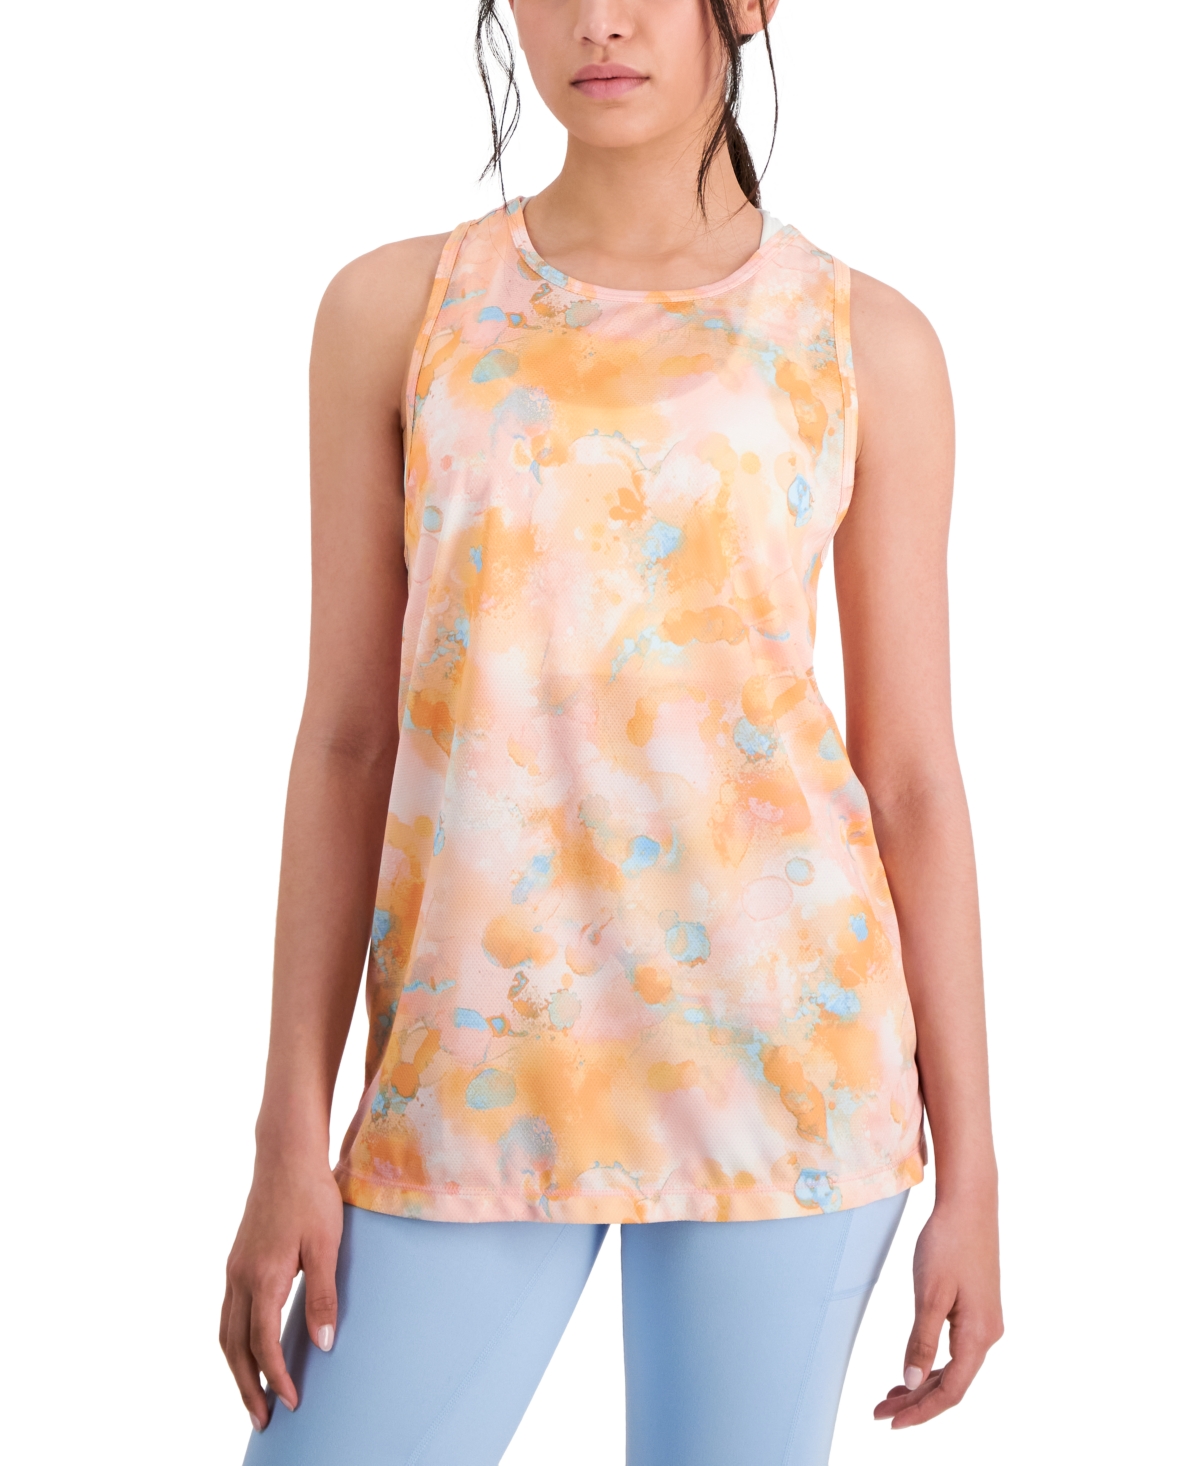 Women's Printed Birdseye Mesh Tank Top, Created for Macy's - Pink Icing